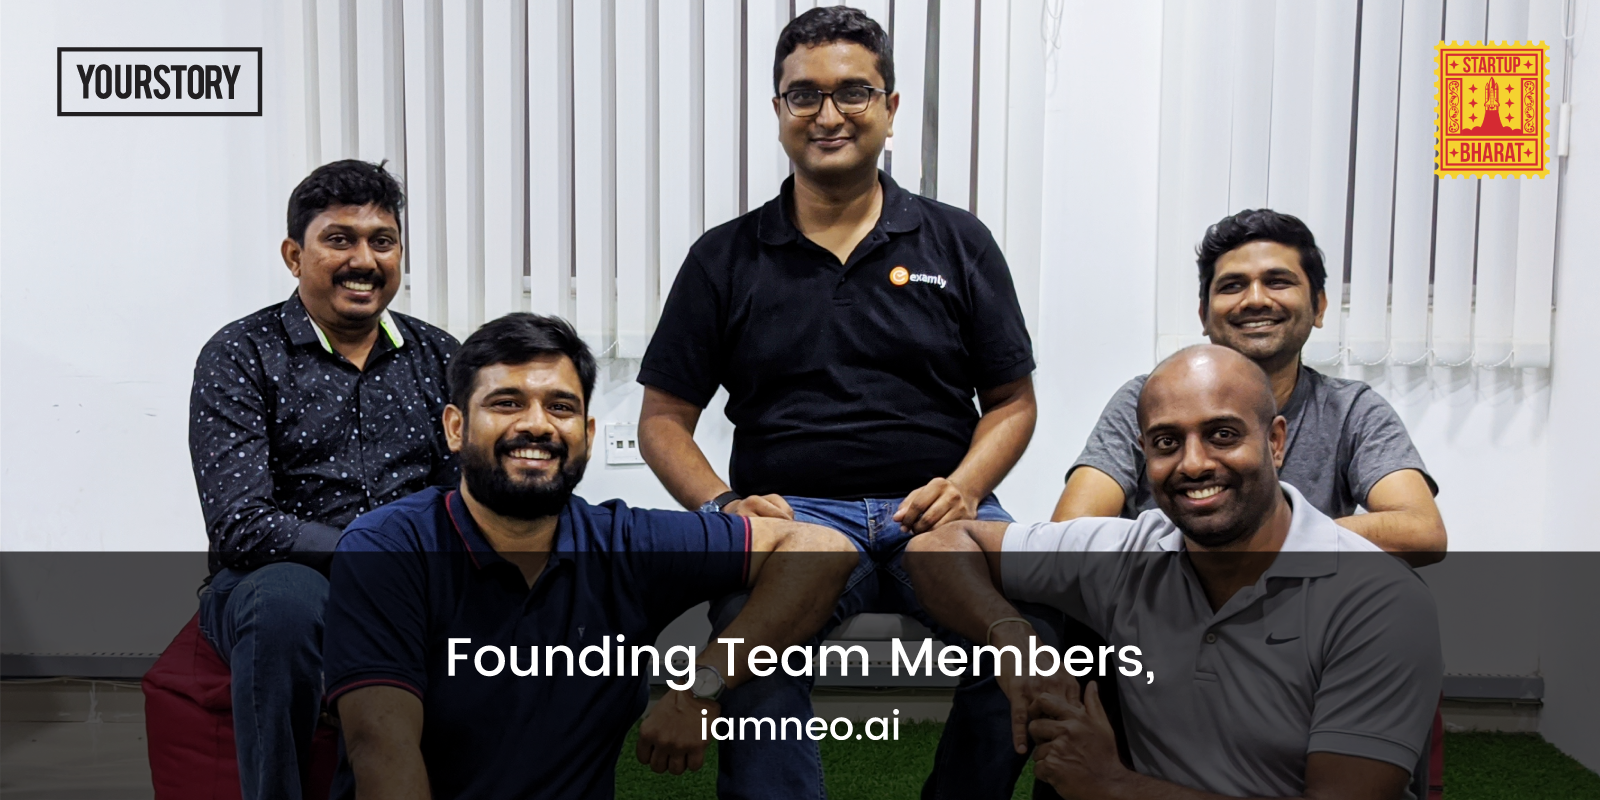 [Startup Bharat] Using AI-driven tools, Coimbatore-based iamneo is building a ‘Freshworks’ for IT skilling